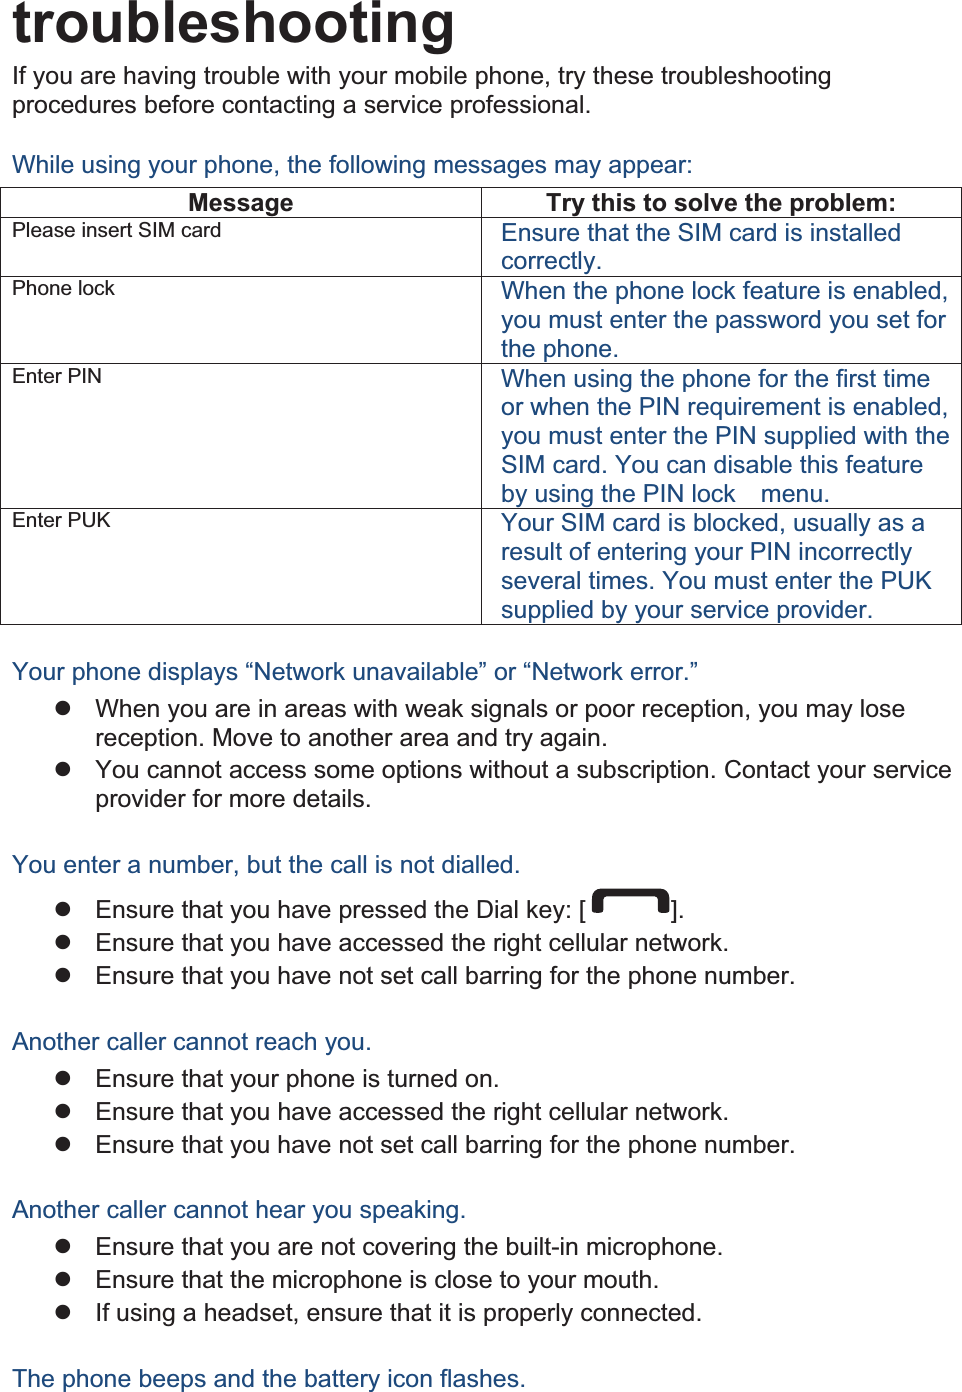 troubleshootingIf you are having trouble with your mobile phone, try these troubleshooting procedures before contacting a service professional. While using your phone, the following messages may appear: Message  Try this to solve the problem: Please insert SIM card  Ensure that the SIM card is installed correctly. Phone lock  When the phone lock feature is enabled, you must enter the password you set for the phone. Enter PIN  When using the phone for the first time or when the PIN requirement is enabled, you must enter the PIN supplied with the SIM card. You can disable this feature by using the PIN lock    menu. Enter PUK  Your SIM card is blocked, usually as a result of entering your PIN incorrectly several times. You must enter the PUK supplied by your service provider.    Your phone displays “Network unavailable” or “Network error.” z  When you are in areas with weak signals or poor reception, you may lose reception. Move to another area and try again. z  You cannot access some options without a subscription. Contact your service provider for more details.  You enter a number, but the call is not dialled. z  Ensure that you have pressed the Dial key: [ ]. z  Ensure that you have accessed the right cellular network. z  Ensure that you have not set call barring for the phone number.  Another caller cannot reach you. z  Ensure that your phone is turned on. z  Ensure that you have accessed the right cellular network. z  Ensure that you have not set call barring for the phone number.  Another caller cannot hear you speaking. z  Ensure that you are not covering the built-in microphone. z  Ensure that the microphone is close to your mouth. z  If using a headset, ensure that it is properly connected.  The phone beeps and the battery icon flashes. 